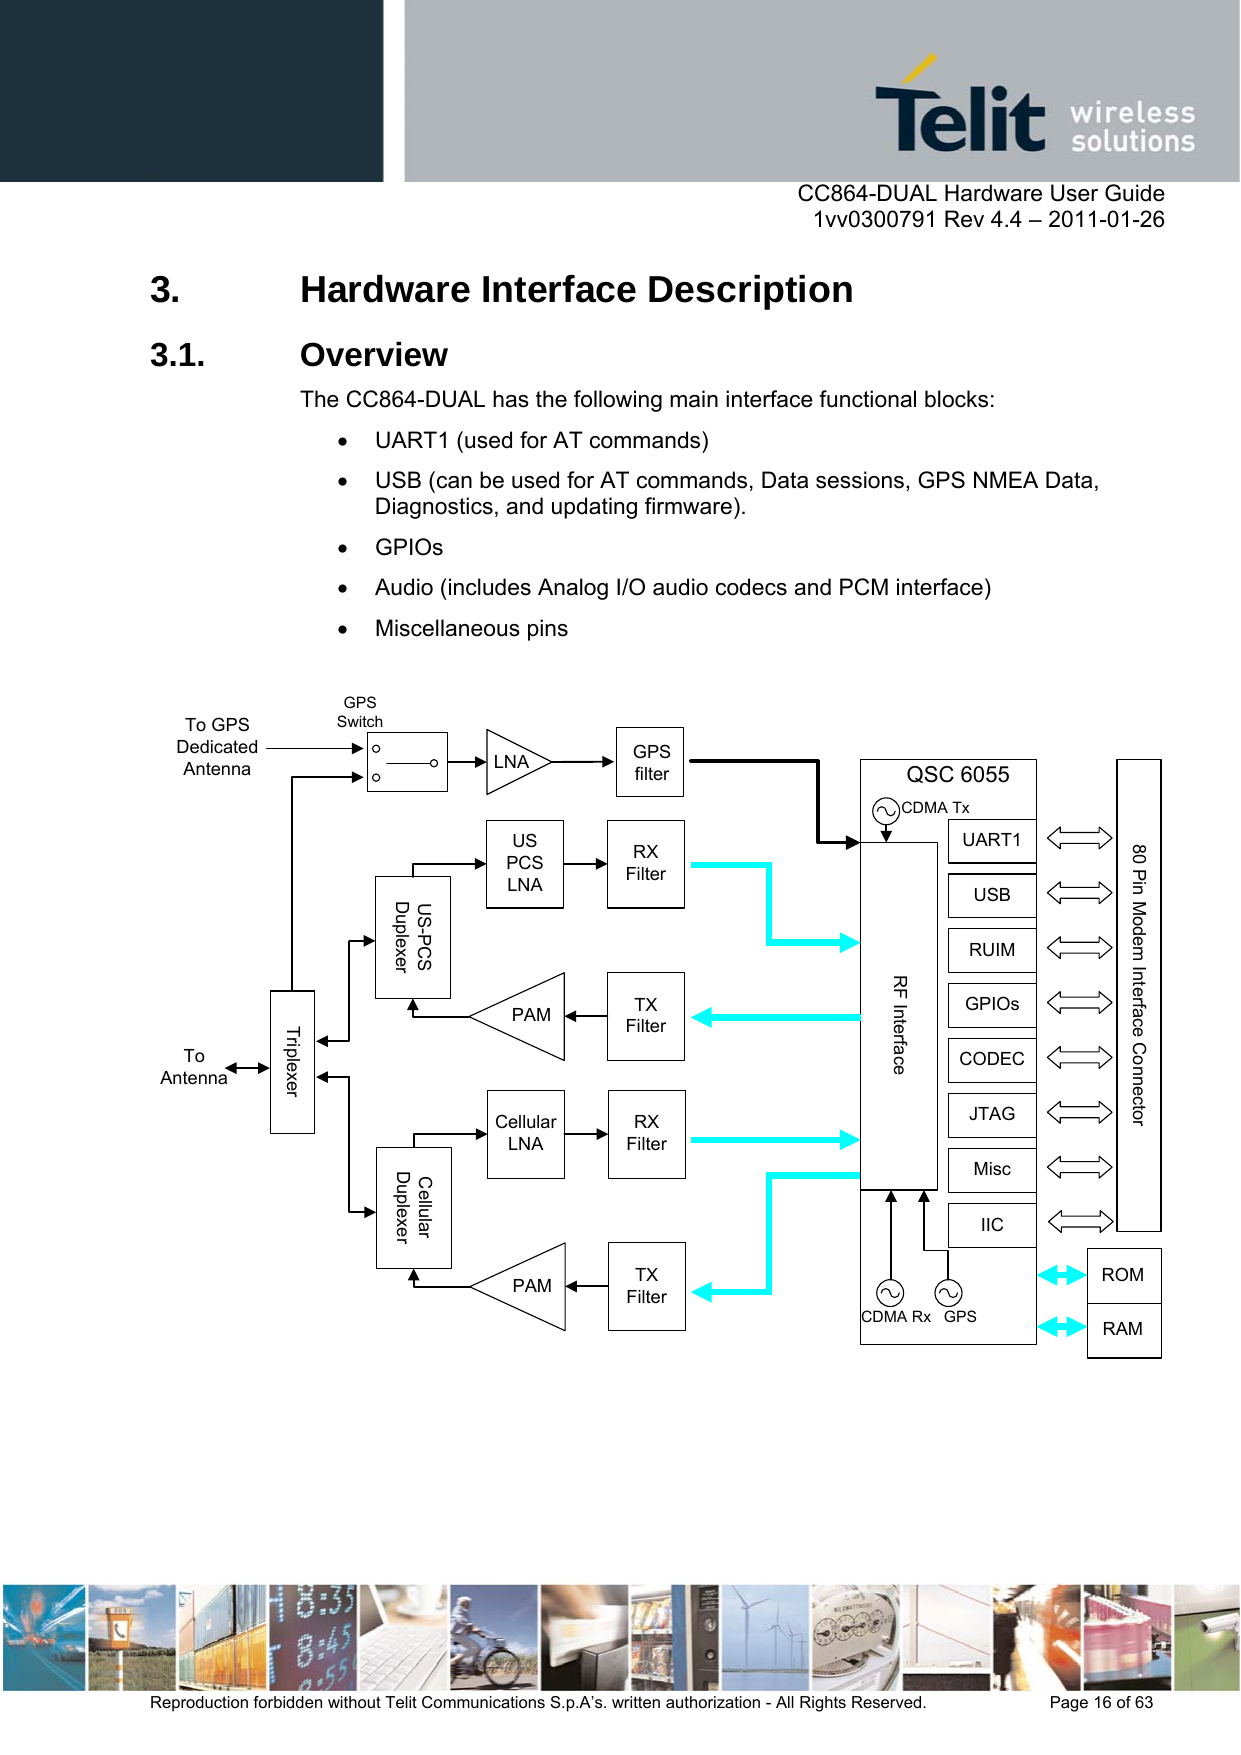      CC864-DUAL Hardware User Guide    1vv0300791 Rev 4.4 – 2011-01-26  Reproduction forbidden without Telit Communications S.p.A’s. written authorization - All Rights Reserved.    Page 16 of 63  3. Hardware Interface Description 3.1. Overview The CC864-DUAL has the following main interface functional blocks:   UART1 (used for AT commands)   USB (can be used for AT commands, Data sessions, GPS NMEA Data, Diagnostics, and updating firmware).  GPIOs   Audio (includes Analog I/O audio codecs and PCM interface)  Miscellaneous pins   To AntennaQSC 605580 Pin Modem Interface ConnectorRF InterfaceUS-PCS DuplexerRXFilterUS PCS LNAPAM TX FilterCellular DuplexerRXFilterCellular LNAPAM TX FilterTriplexerUSBUART1RUIMGPIOsCODECJTAGMiscTo GPS Dedicated AntennaROMRAMCDMA Rx GPSCDMA TxIICGPSfilterLNAGPSSwitch   